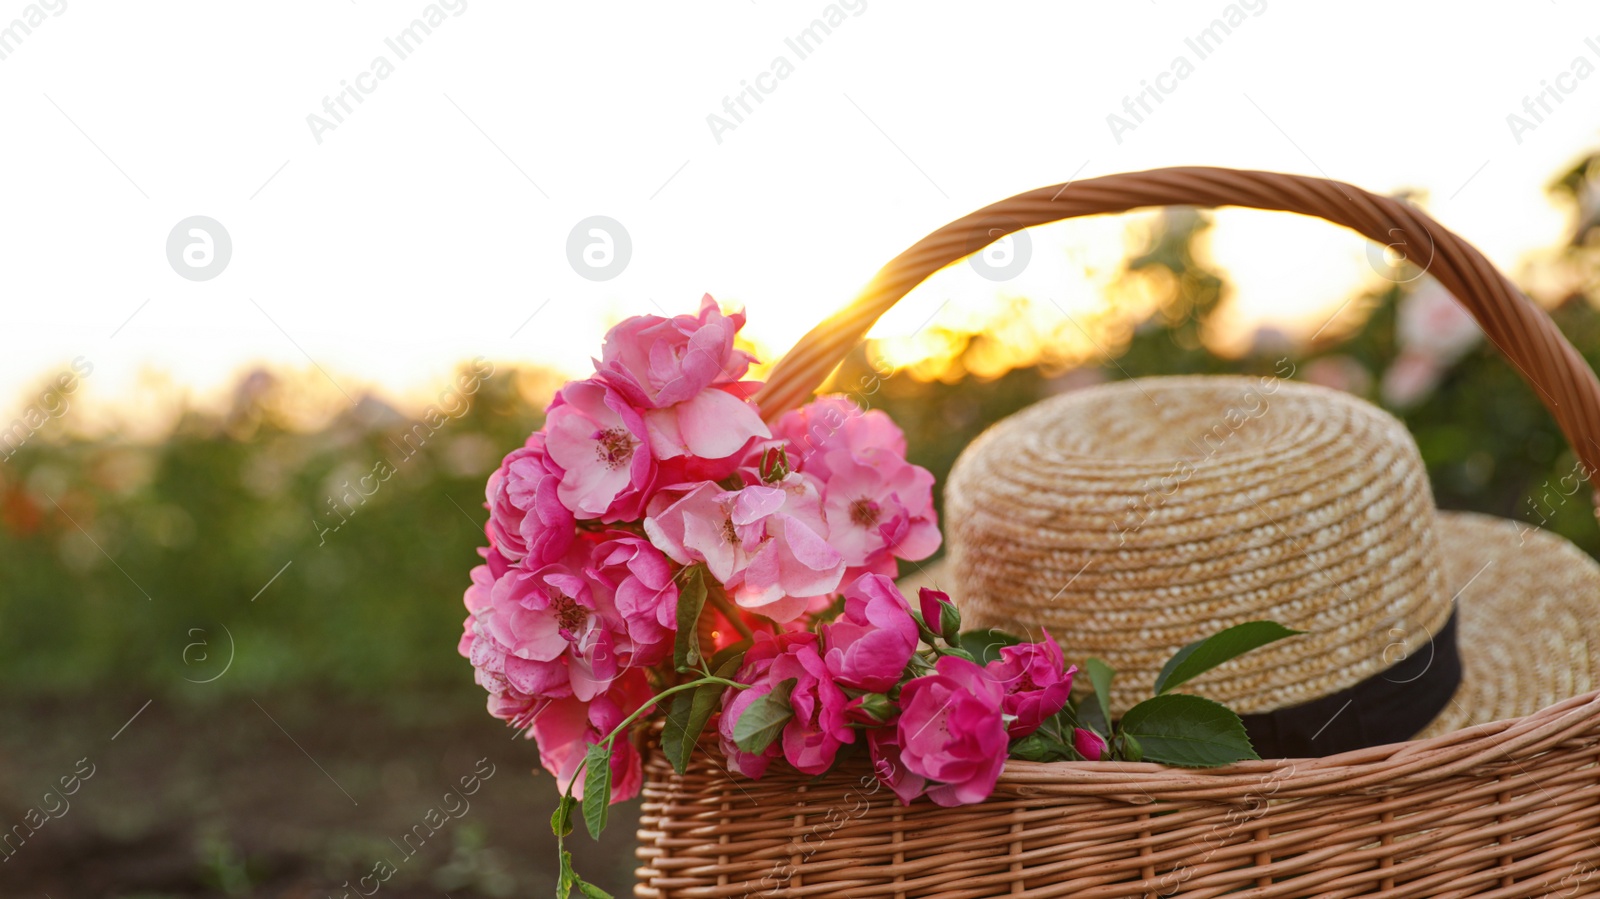 Photo of Wicker basket with straw hat and roses outdoors. Gardening